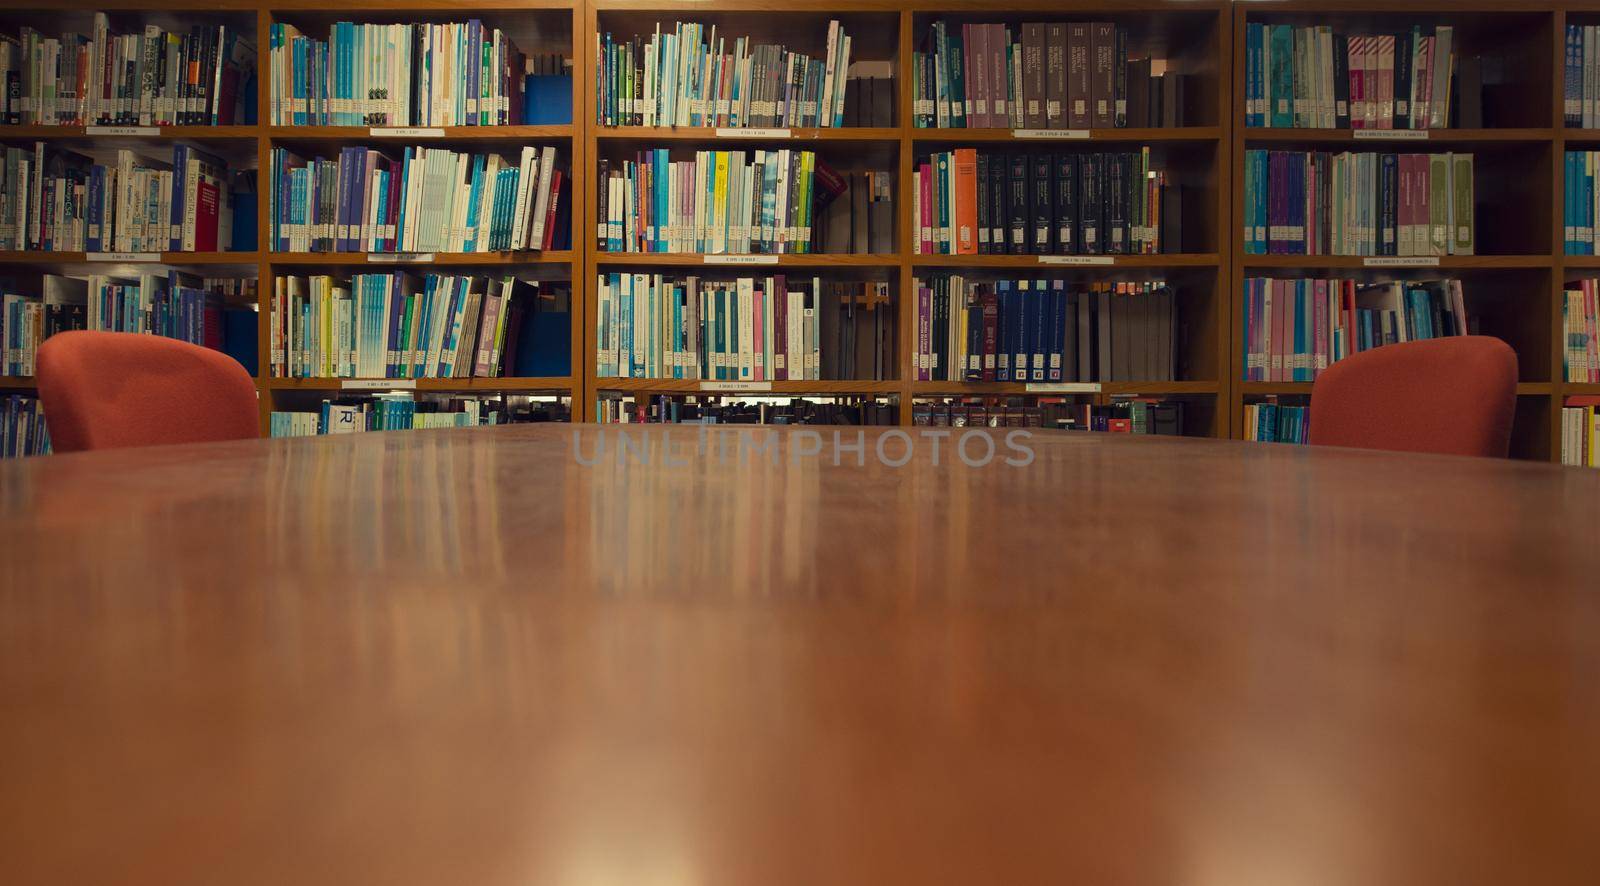 A Wood desk and bookshelf in the library room, Education Concept. by thanumporn